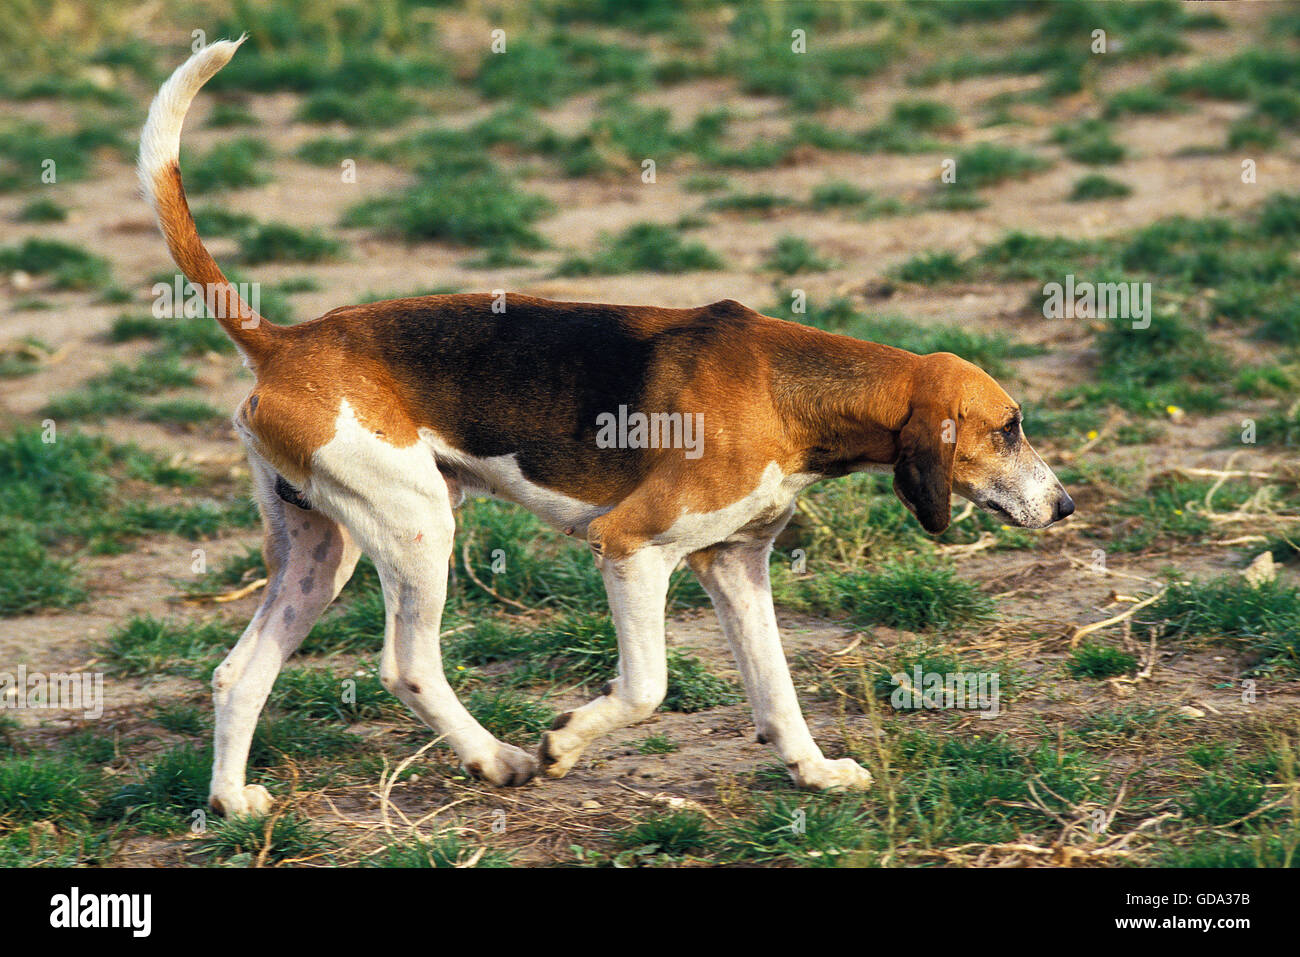 GREAT ANGLO-FRENCH TRICOLOUR HOUND Stock Photo